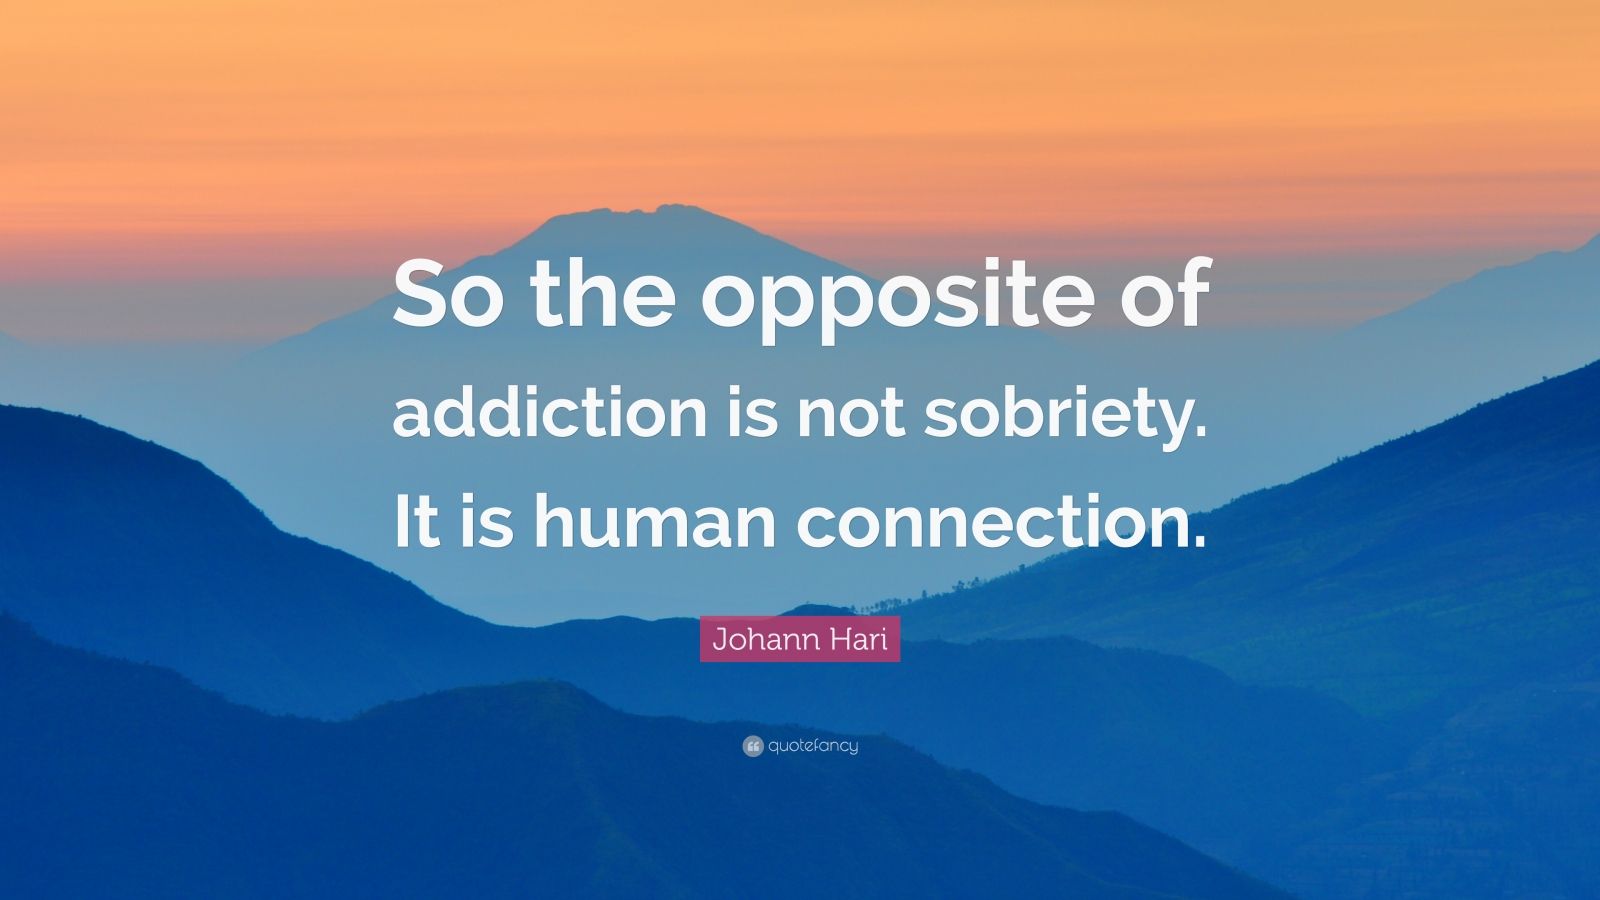 Johann Hari Quote: “So the opposite of addiction is not sobriety. It is